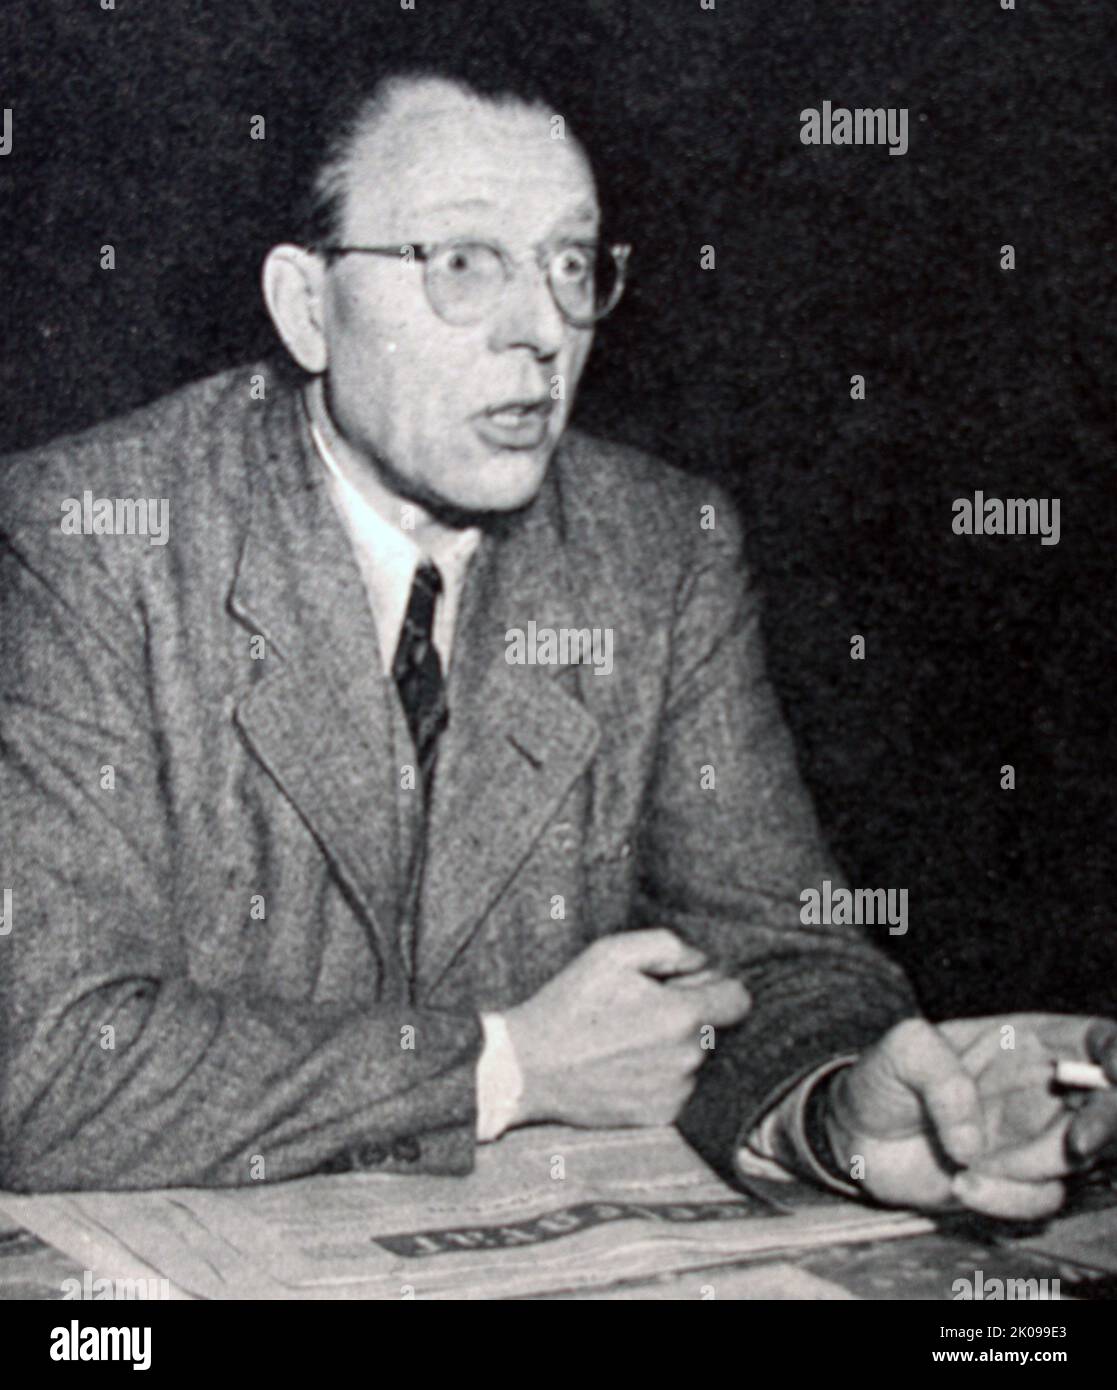 Otto Emil Franz Grotewohl (11 March 1894 - 21 September 1964) was a German politician who served as the first prime minister of the German Democratic Republic (GDR/East Germany) from its foundation in October 1949 until his death in September 1964. Stock Photo